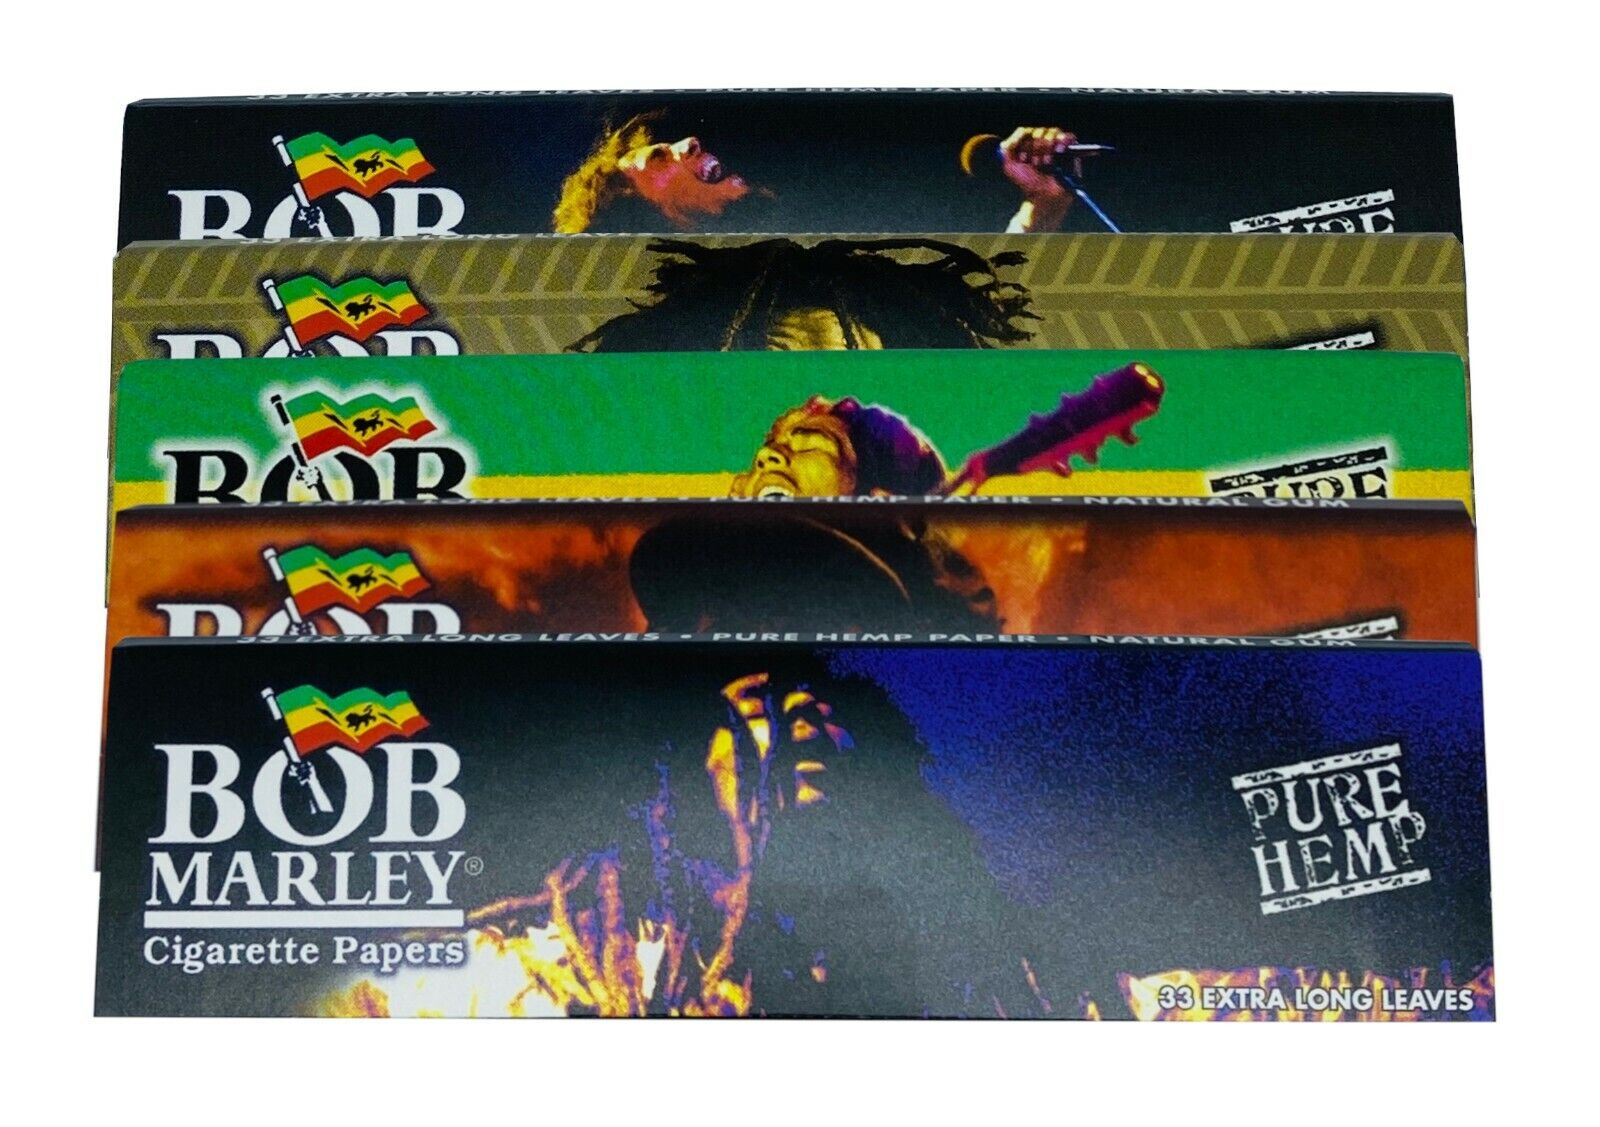 Bob Marley King Size Rolling Papers Authentic 5 Packs (33 Papers Per Pack)